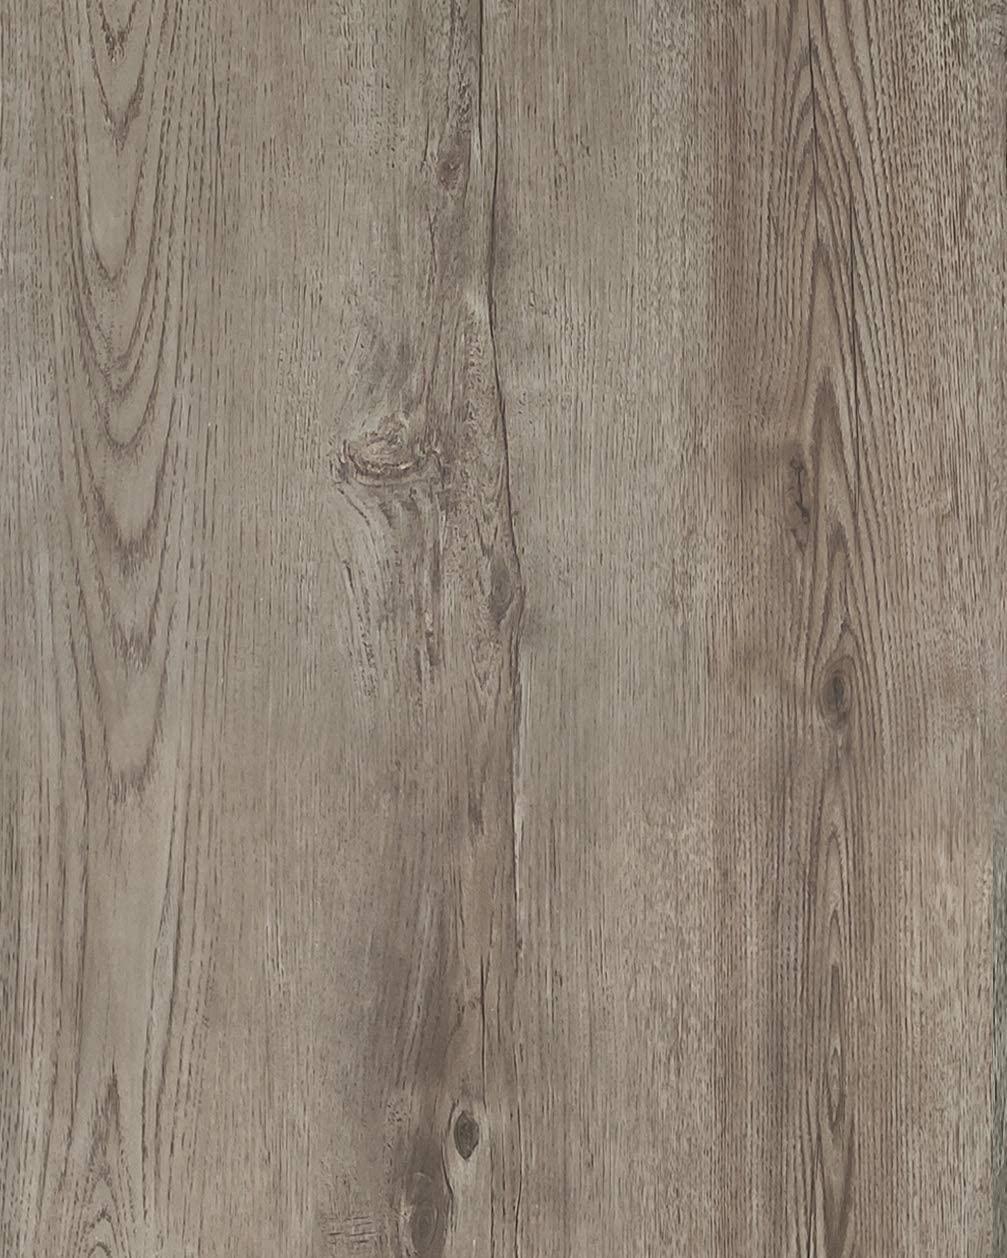 Feisoon, Feisoon 17.7 x472 Light Brown Wood Contact Paper Peel and Stick Wood Grain Wallpaper Removable Contact Paper Self Adhesive Wallpaper for Bedroom Wall Table Countertops Cabinet Furniture Home Decor